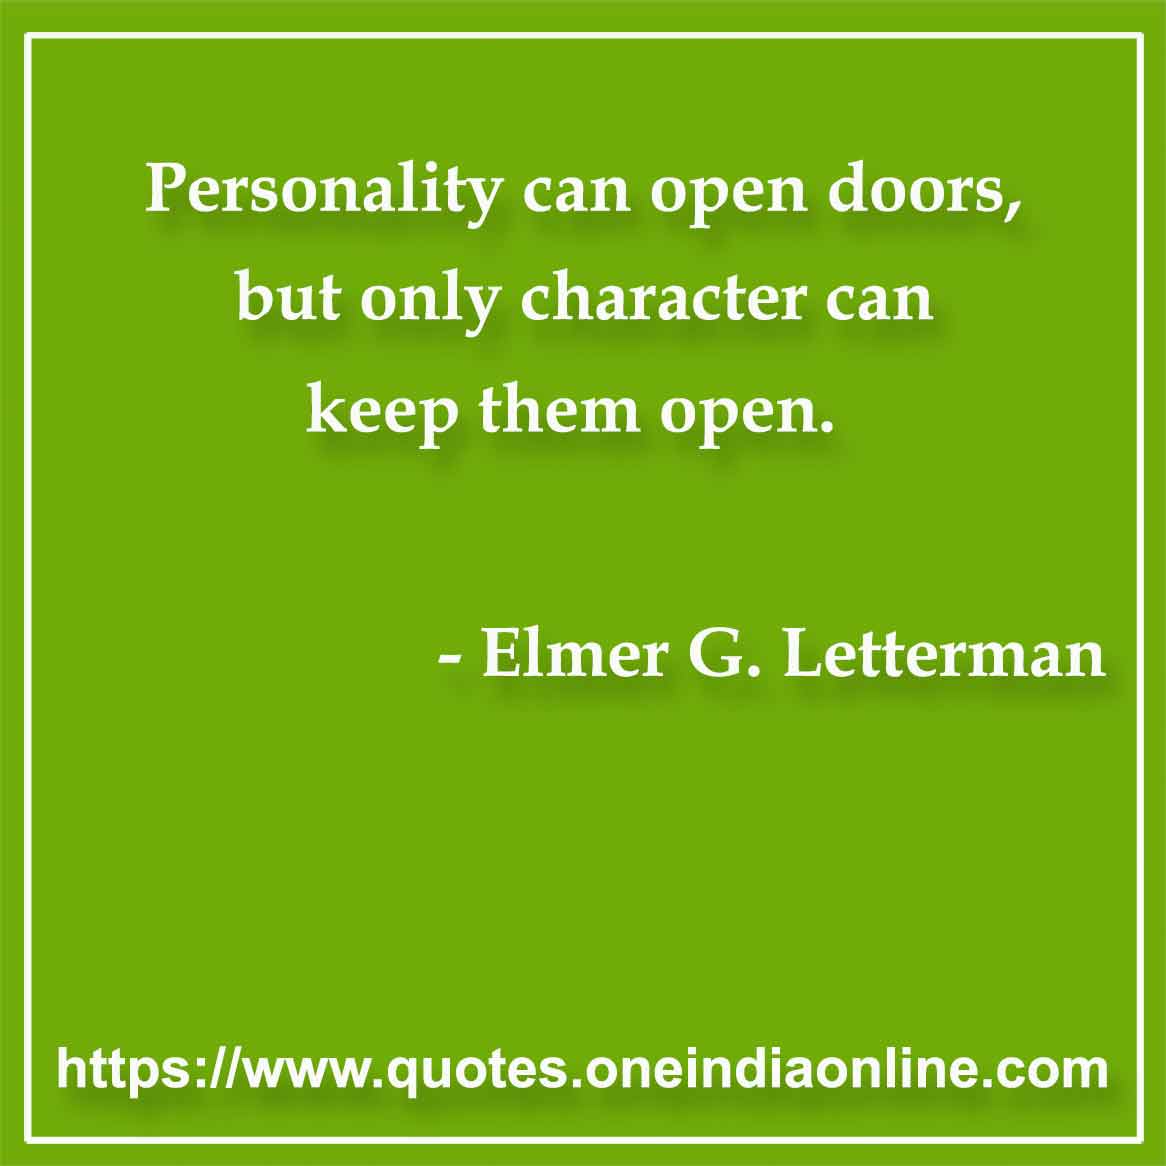 Personality can open doors, but only character can keep them open.

- Character Quote by Elmer G. Letterman 